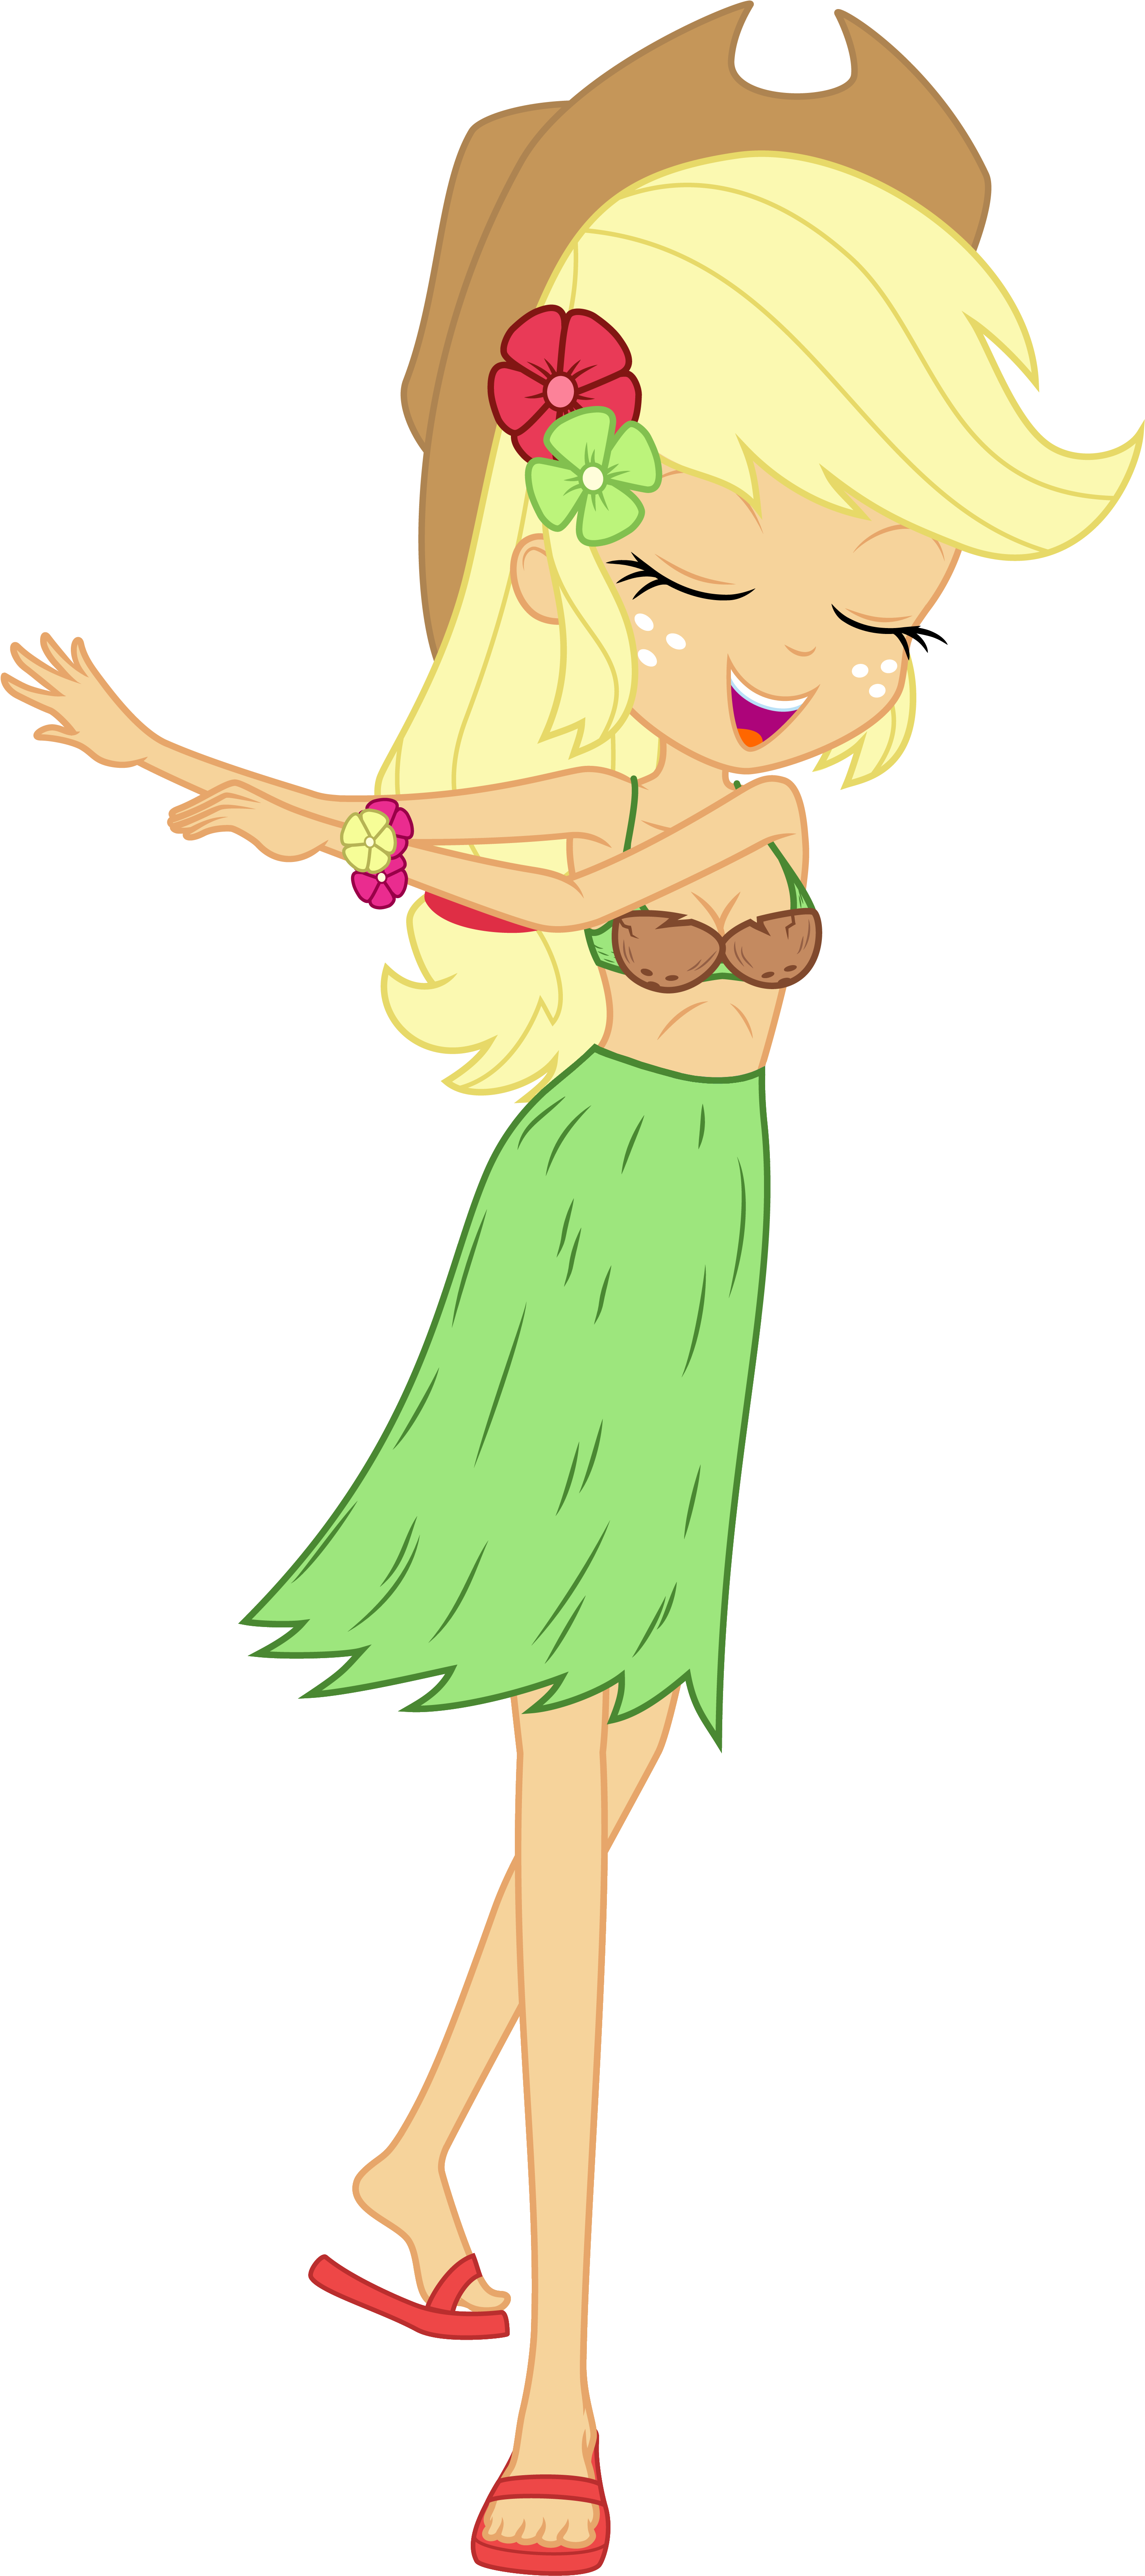 Cartoon Of A Woman In A Green Skirt And Garment